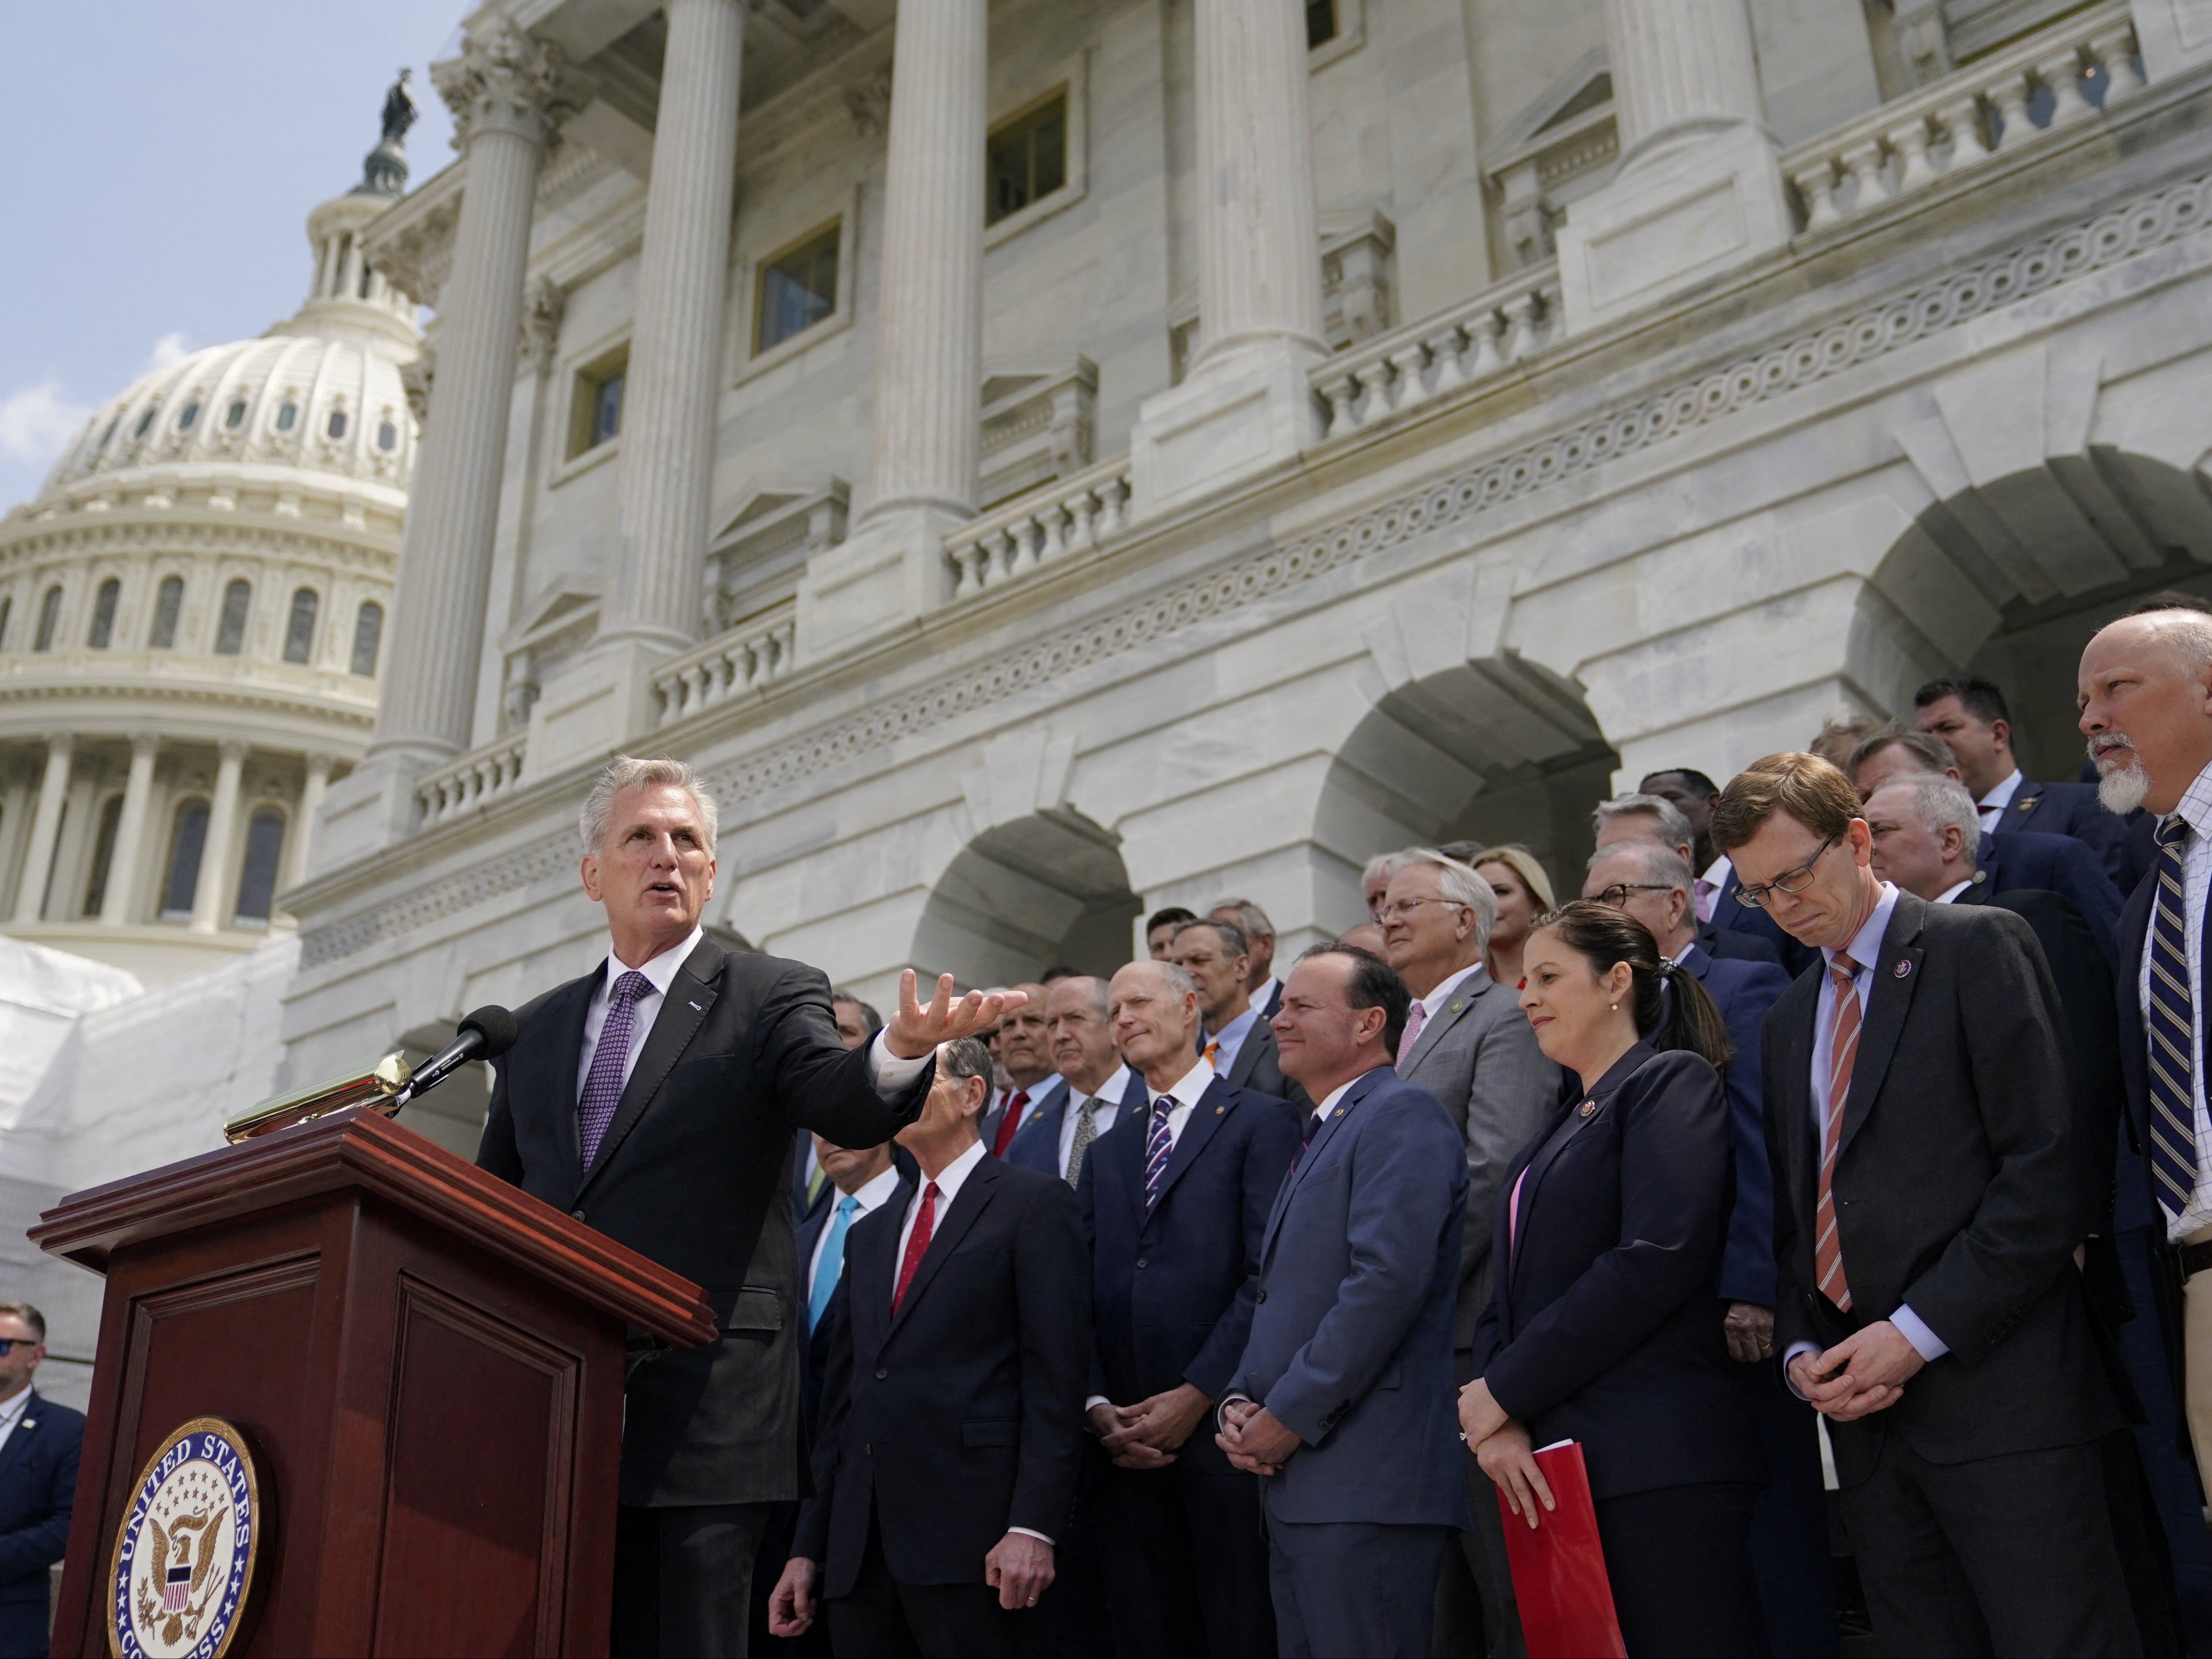 Speaker of the House Kevin McCarthy speaks to reporters as he stands with Congressional Republicans from both the US House and Senate during an event about debt ceiling negotiations